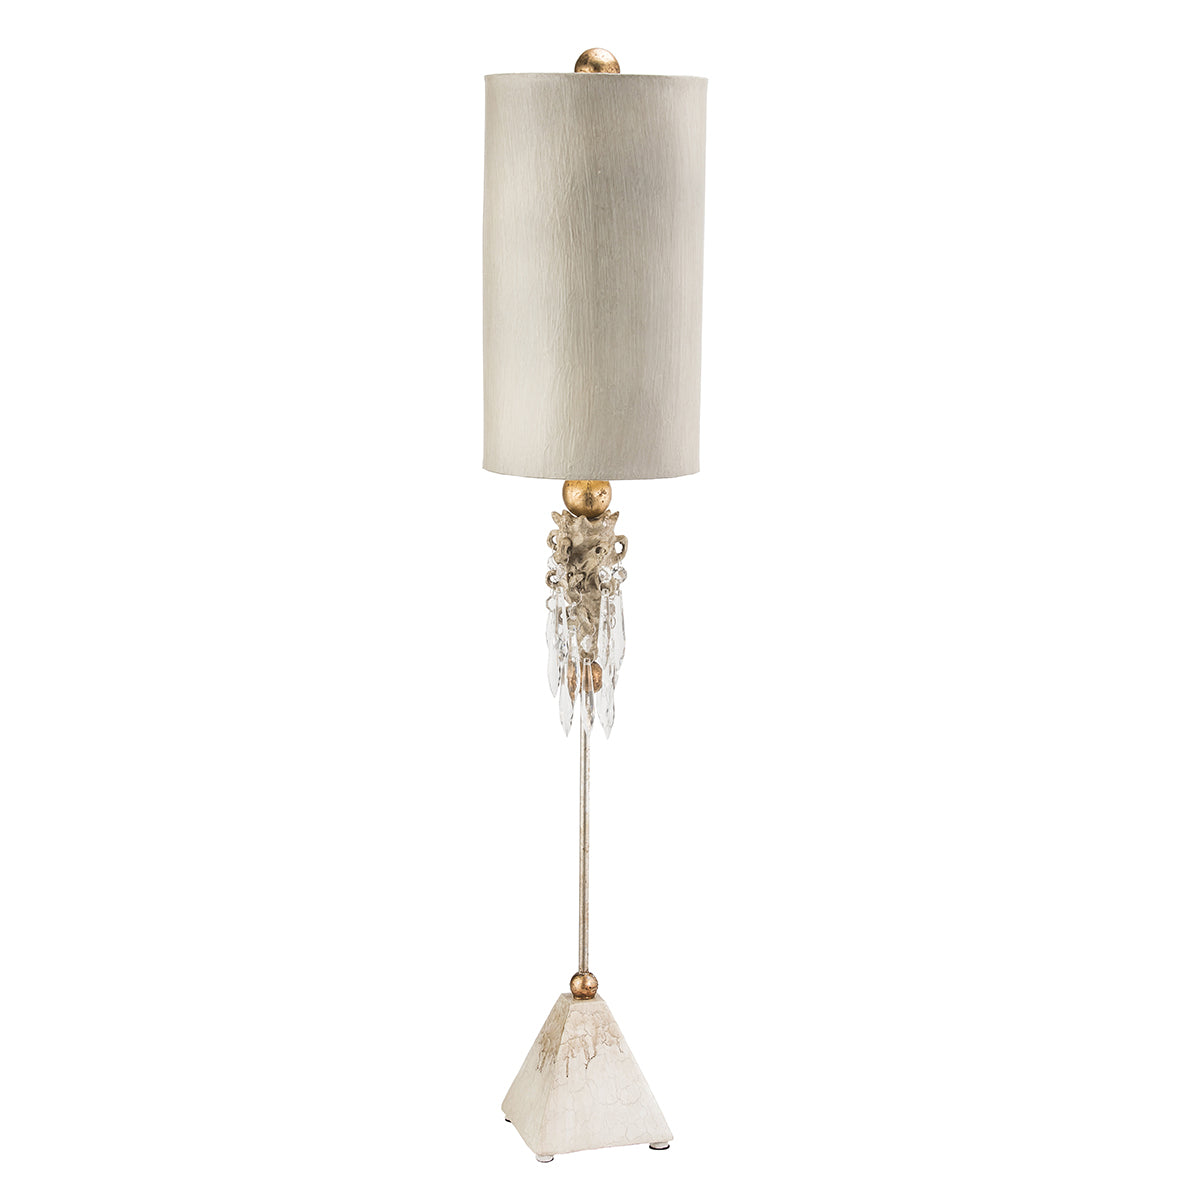 Lucas + McKearn One Light Buffet Lamp from the Madison collection in Putty finish